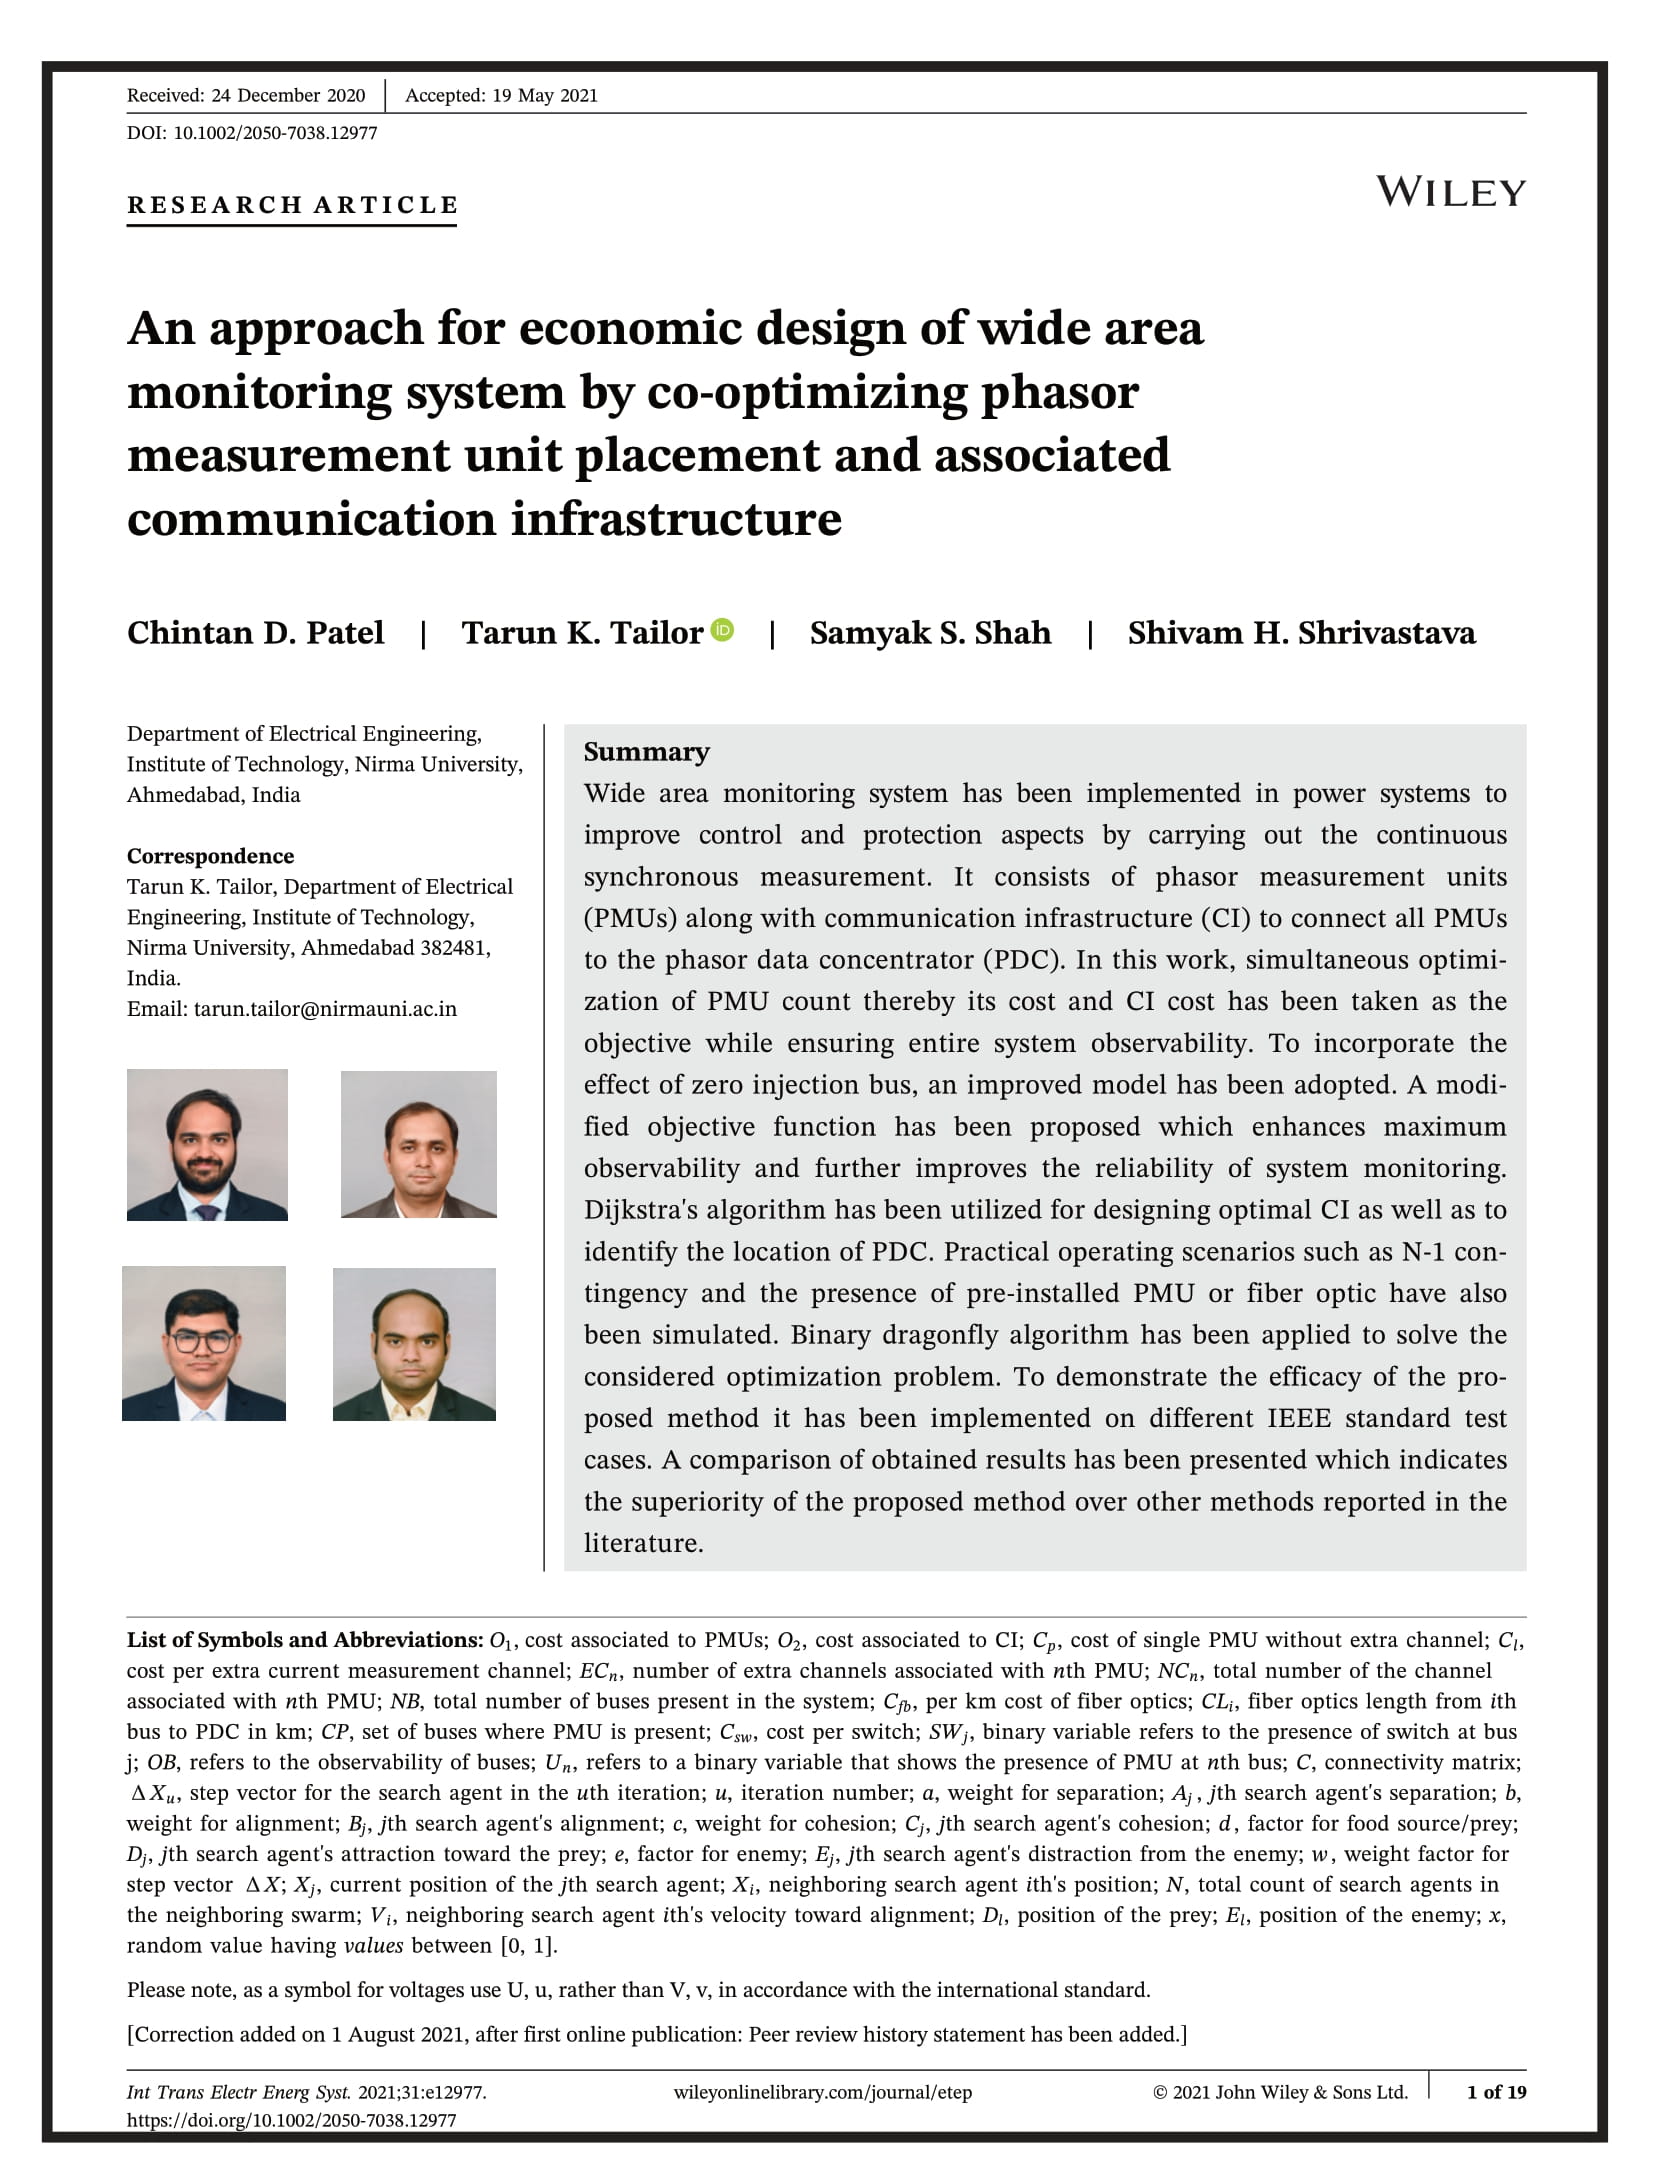 An approach for economic design of wide area monitoring system by co-optimizing phasor measurement unit placement and associated communication infrastructure